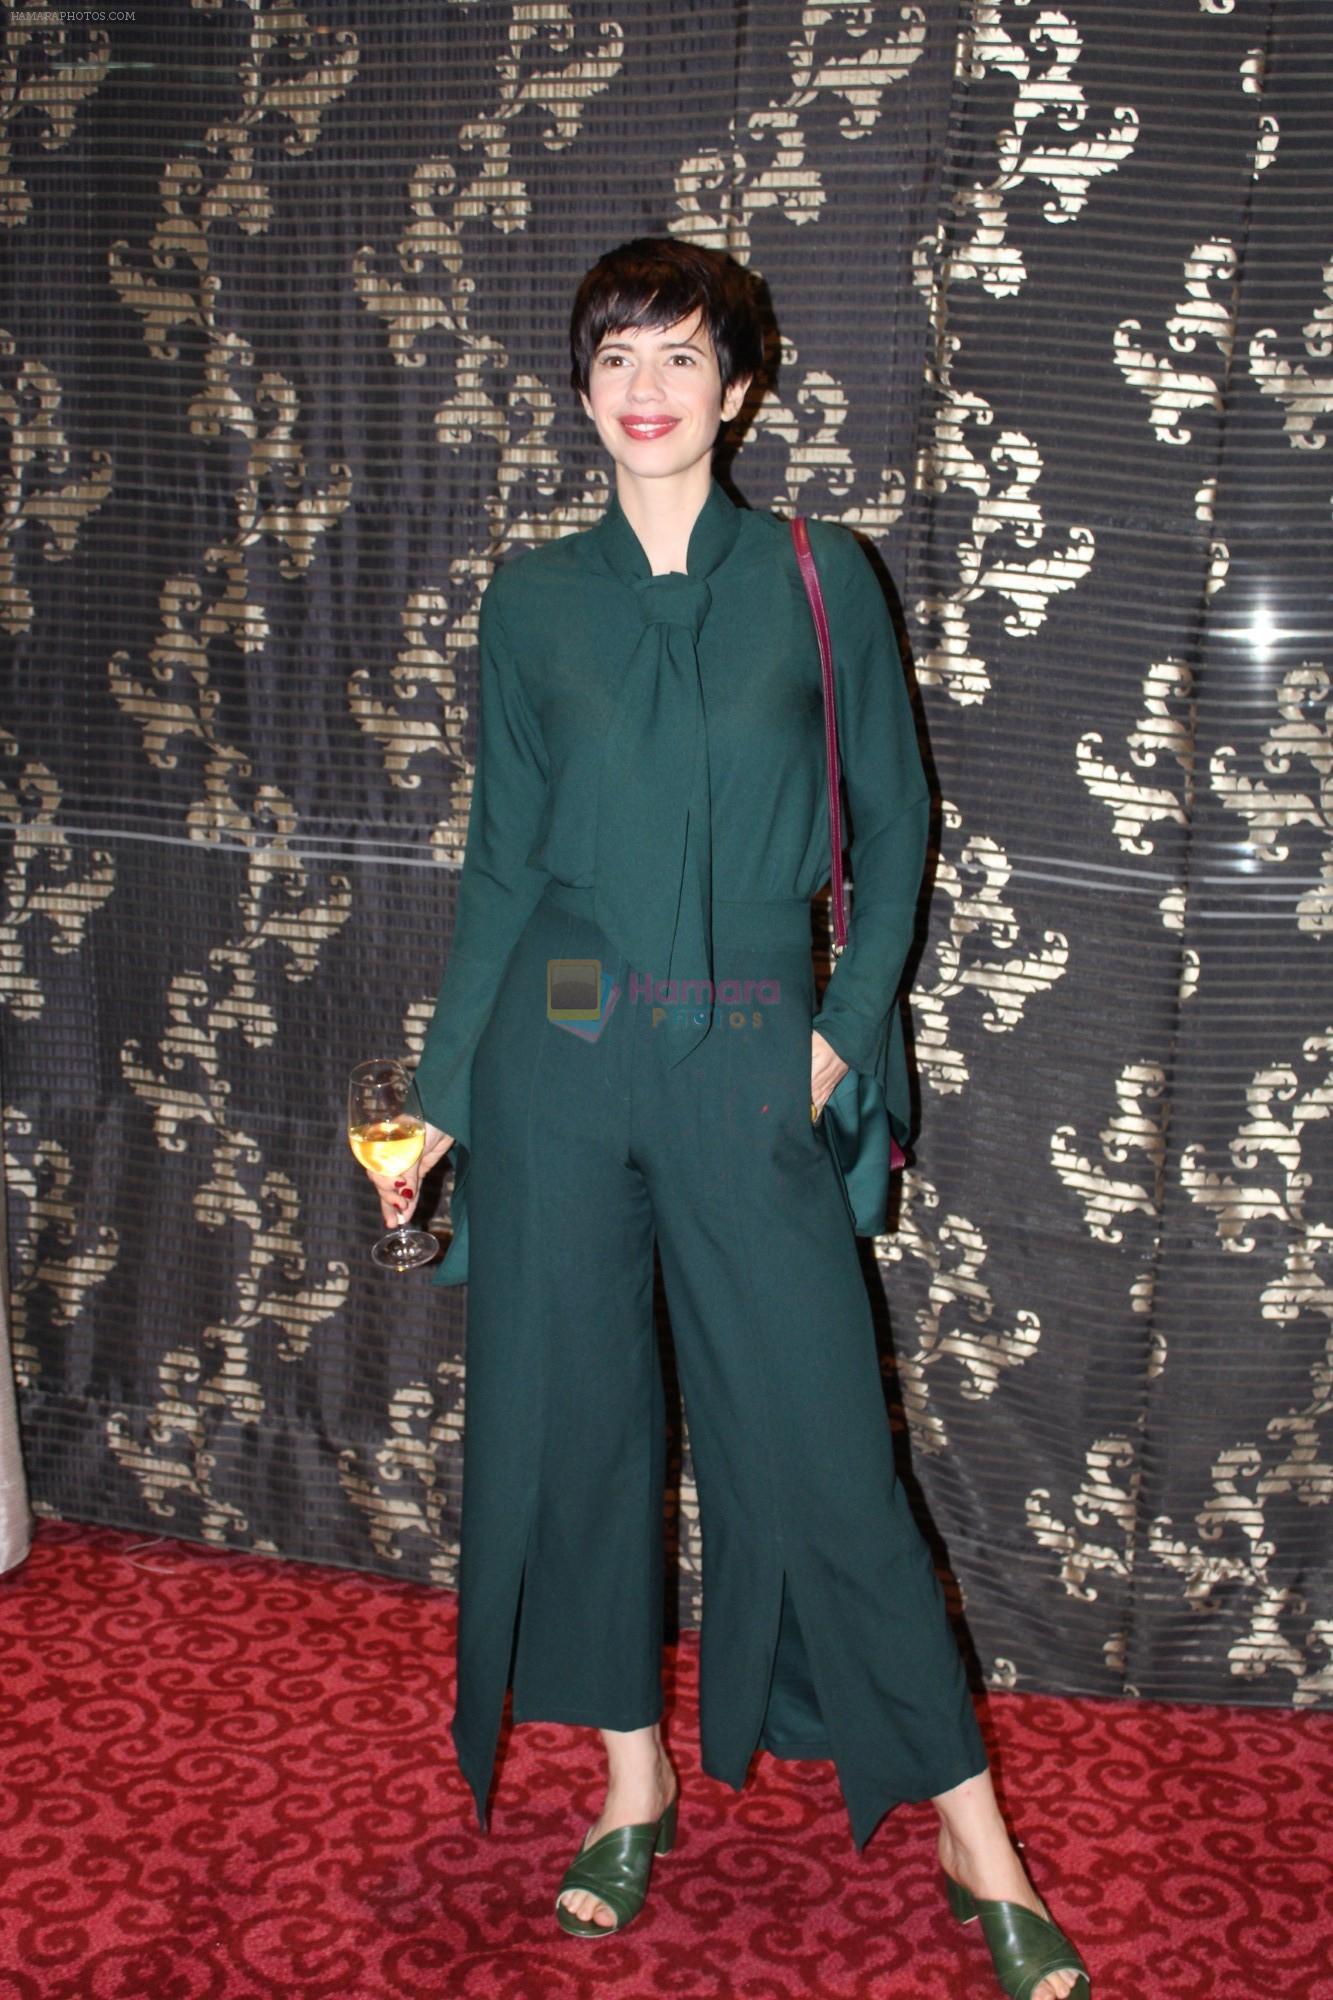 Kalki Koechlin at 2nd Indo-French Meeting Wherin film Industry Culture Exchange Between India on 15th Dec 2018